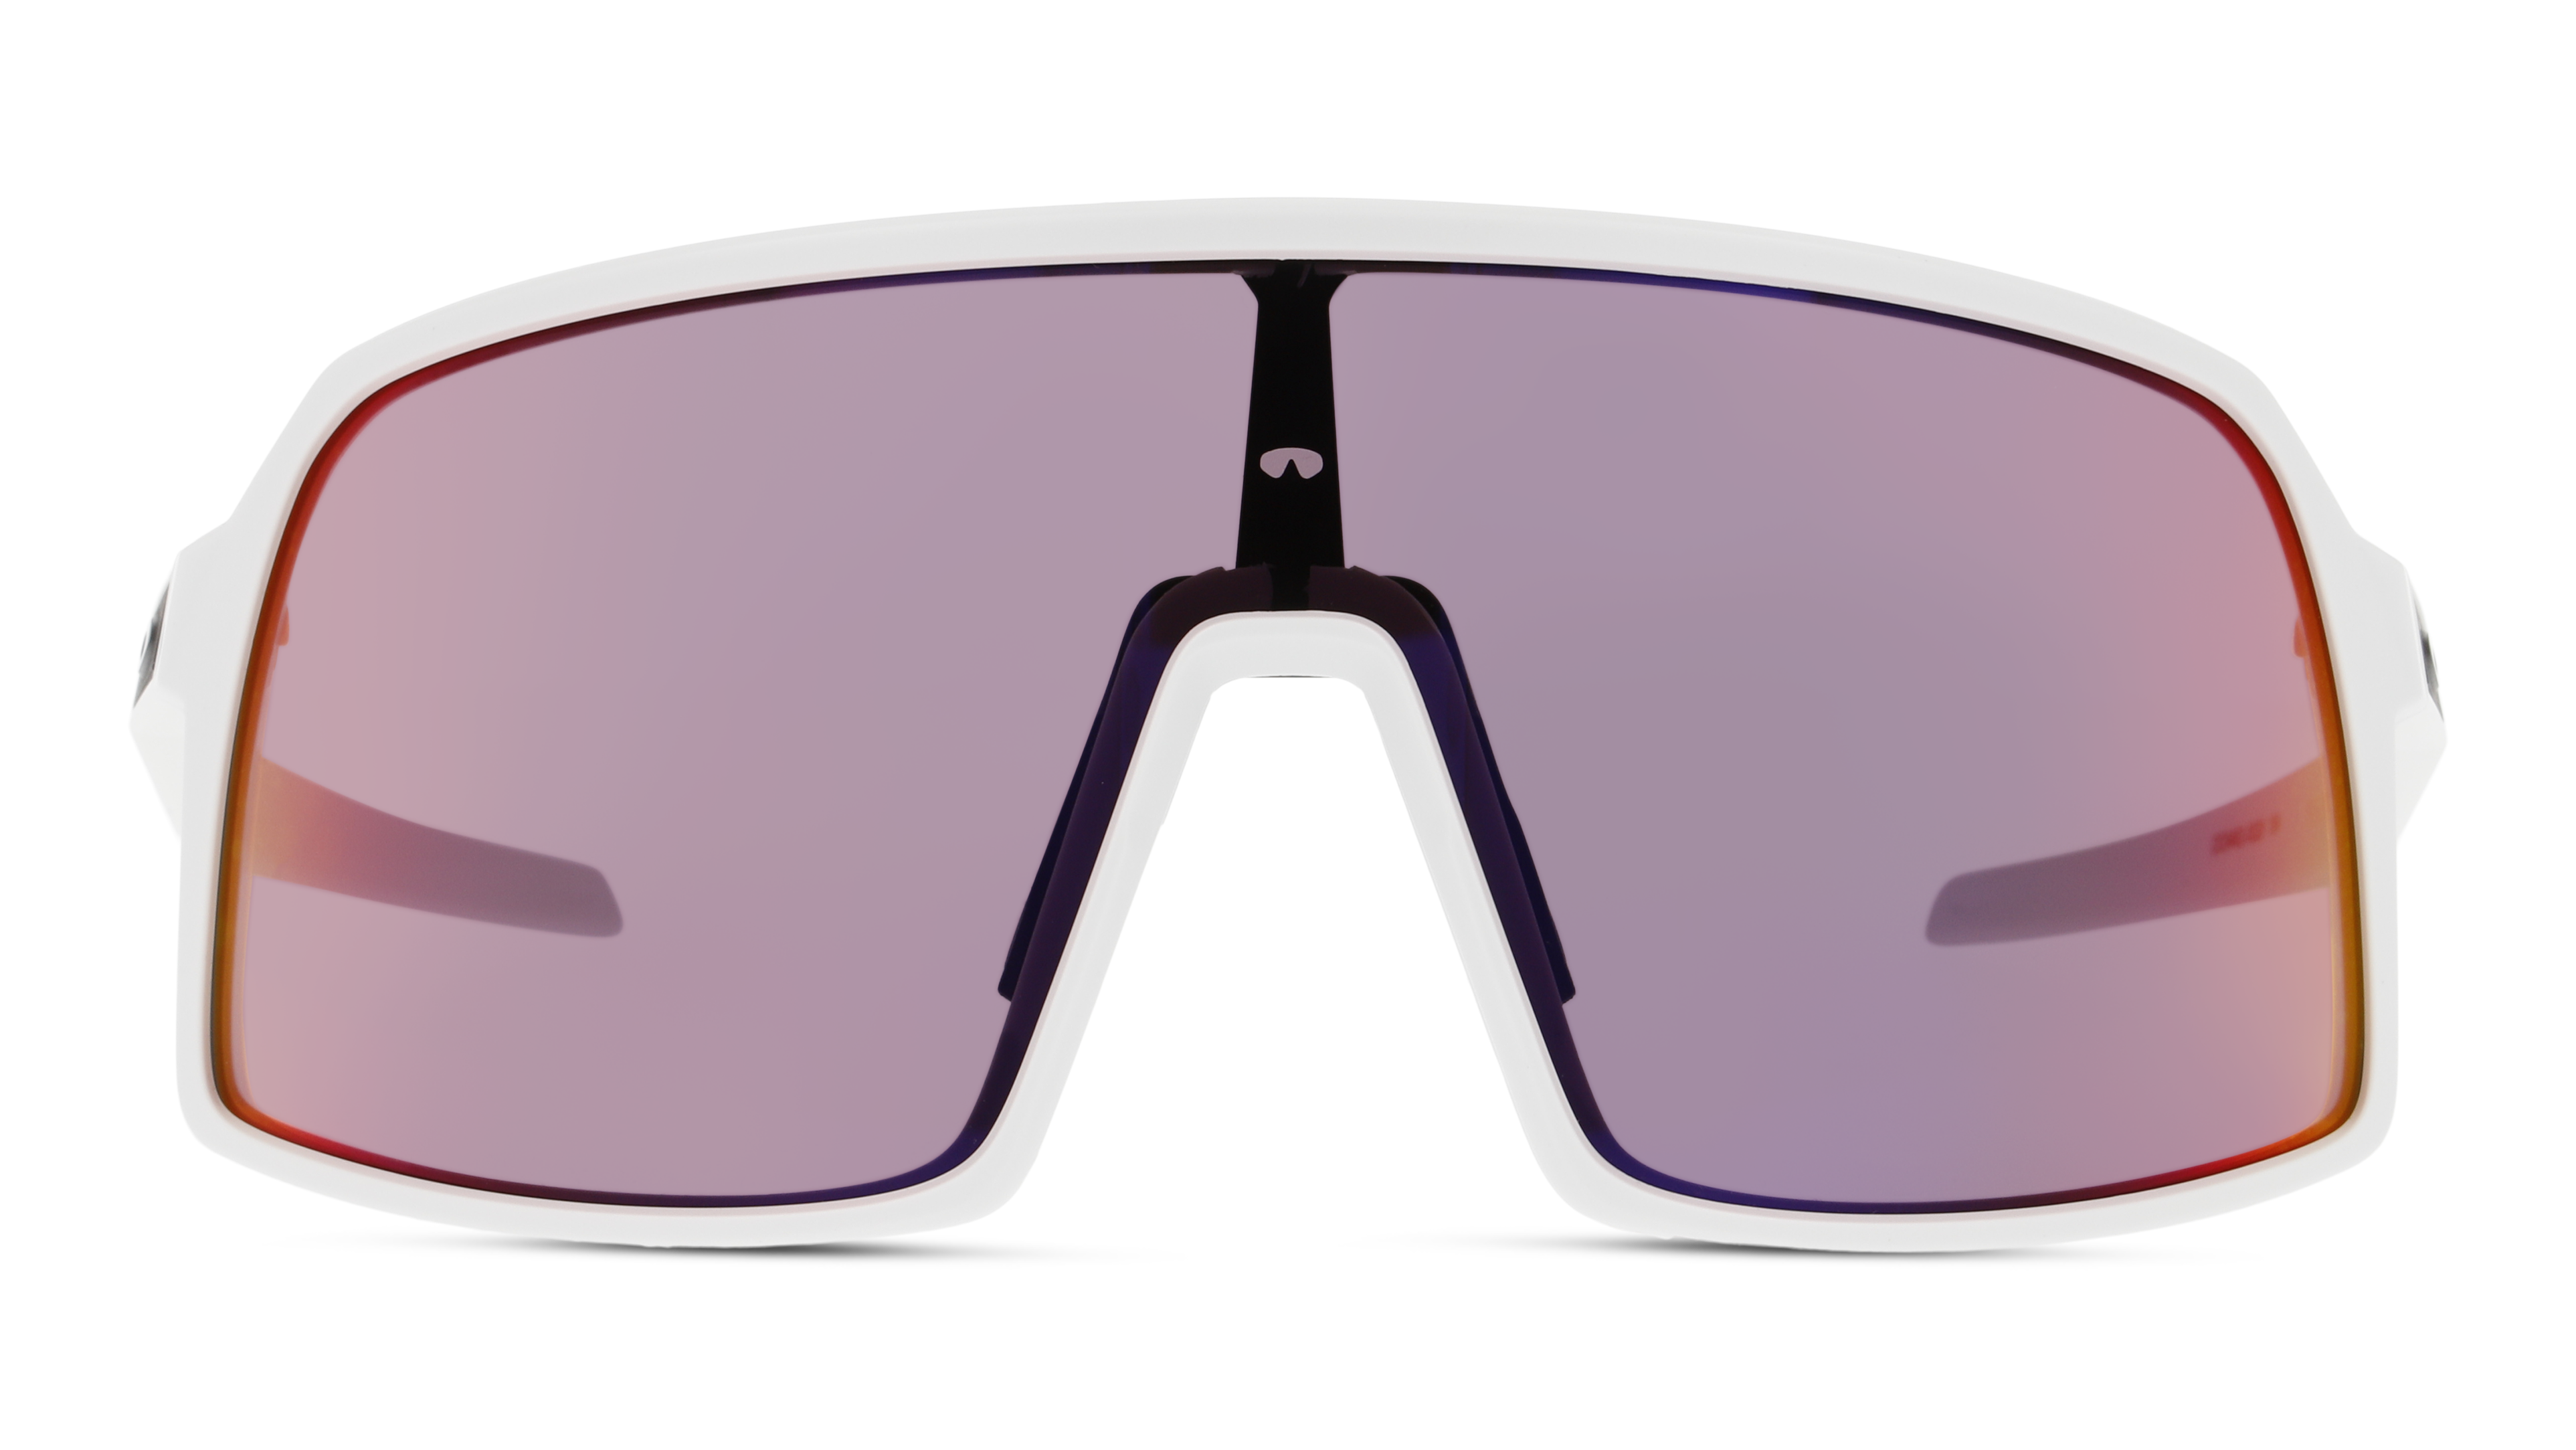 [products.image.front] Oakley Sutro S 0OO9462 946205